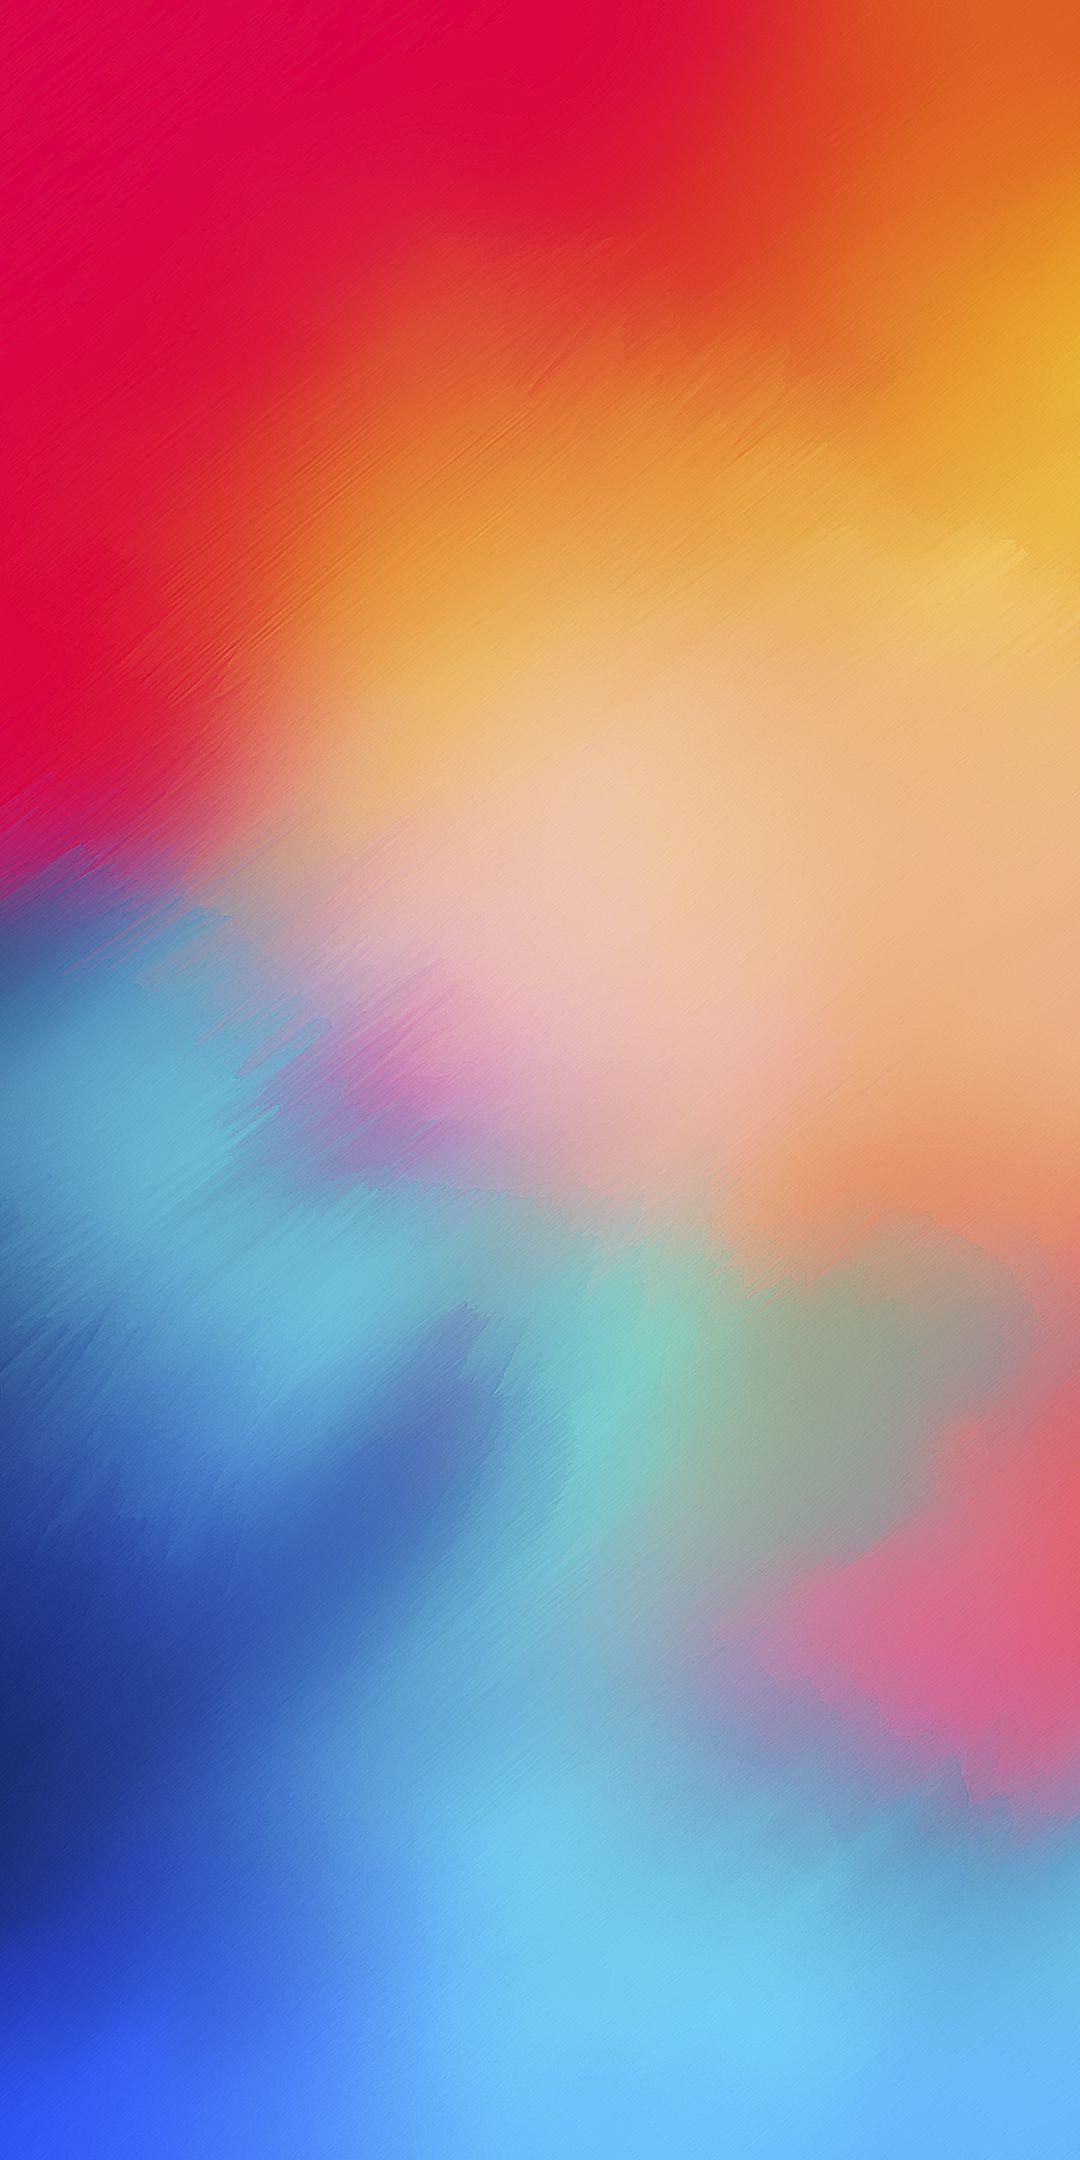 Huawei Mate 10 Pro Wallpaper 09 of 10 with Abstract Light. HD